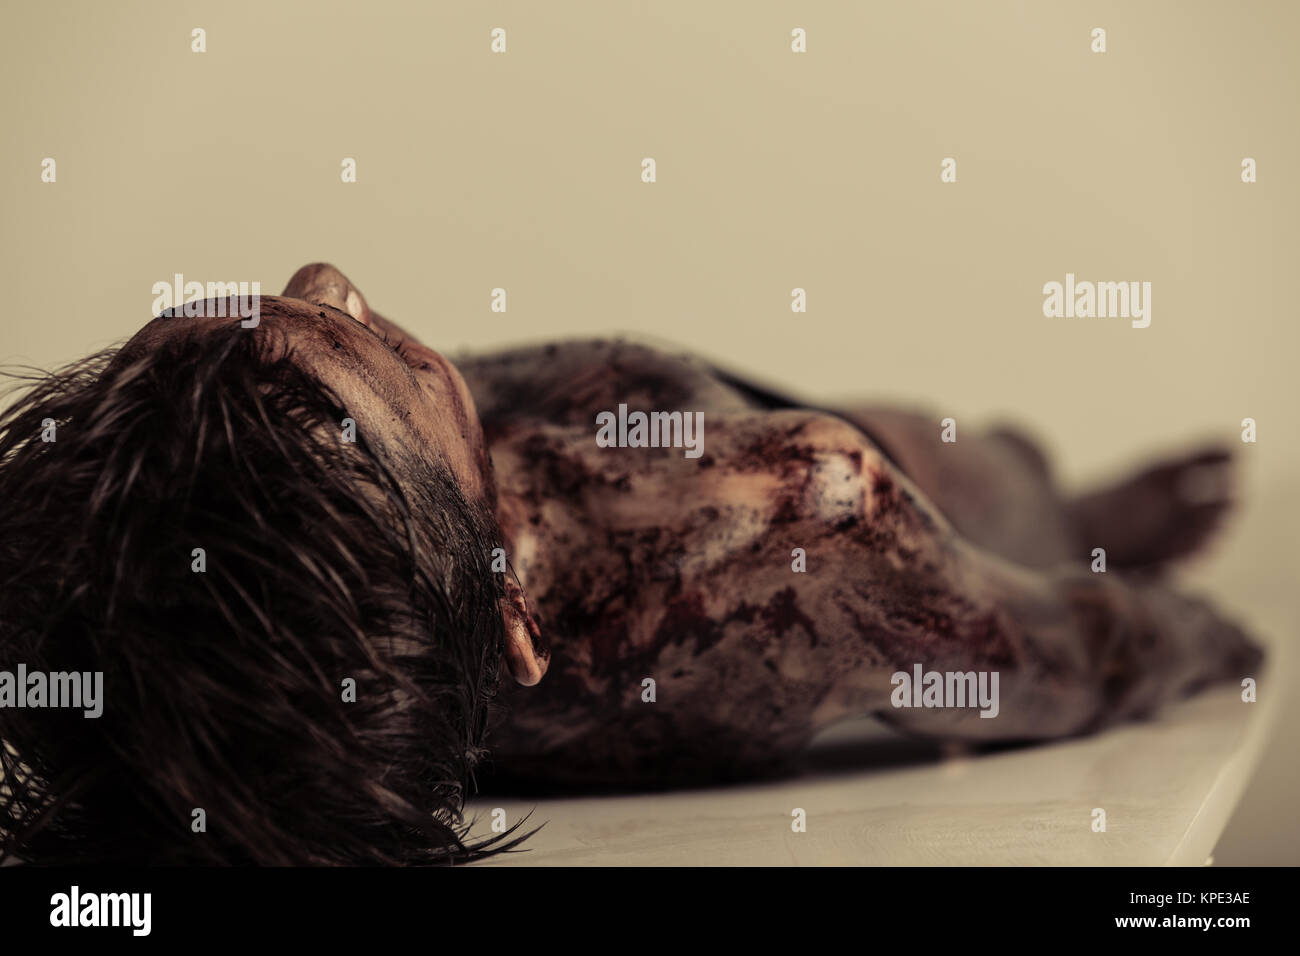 Burnt Body of a Dead Boy Lying on Table in Morgue Stock Photo